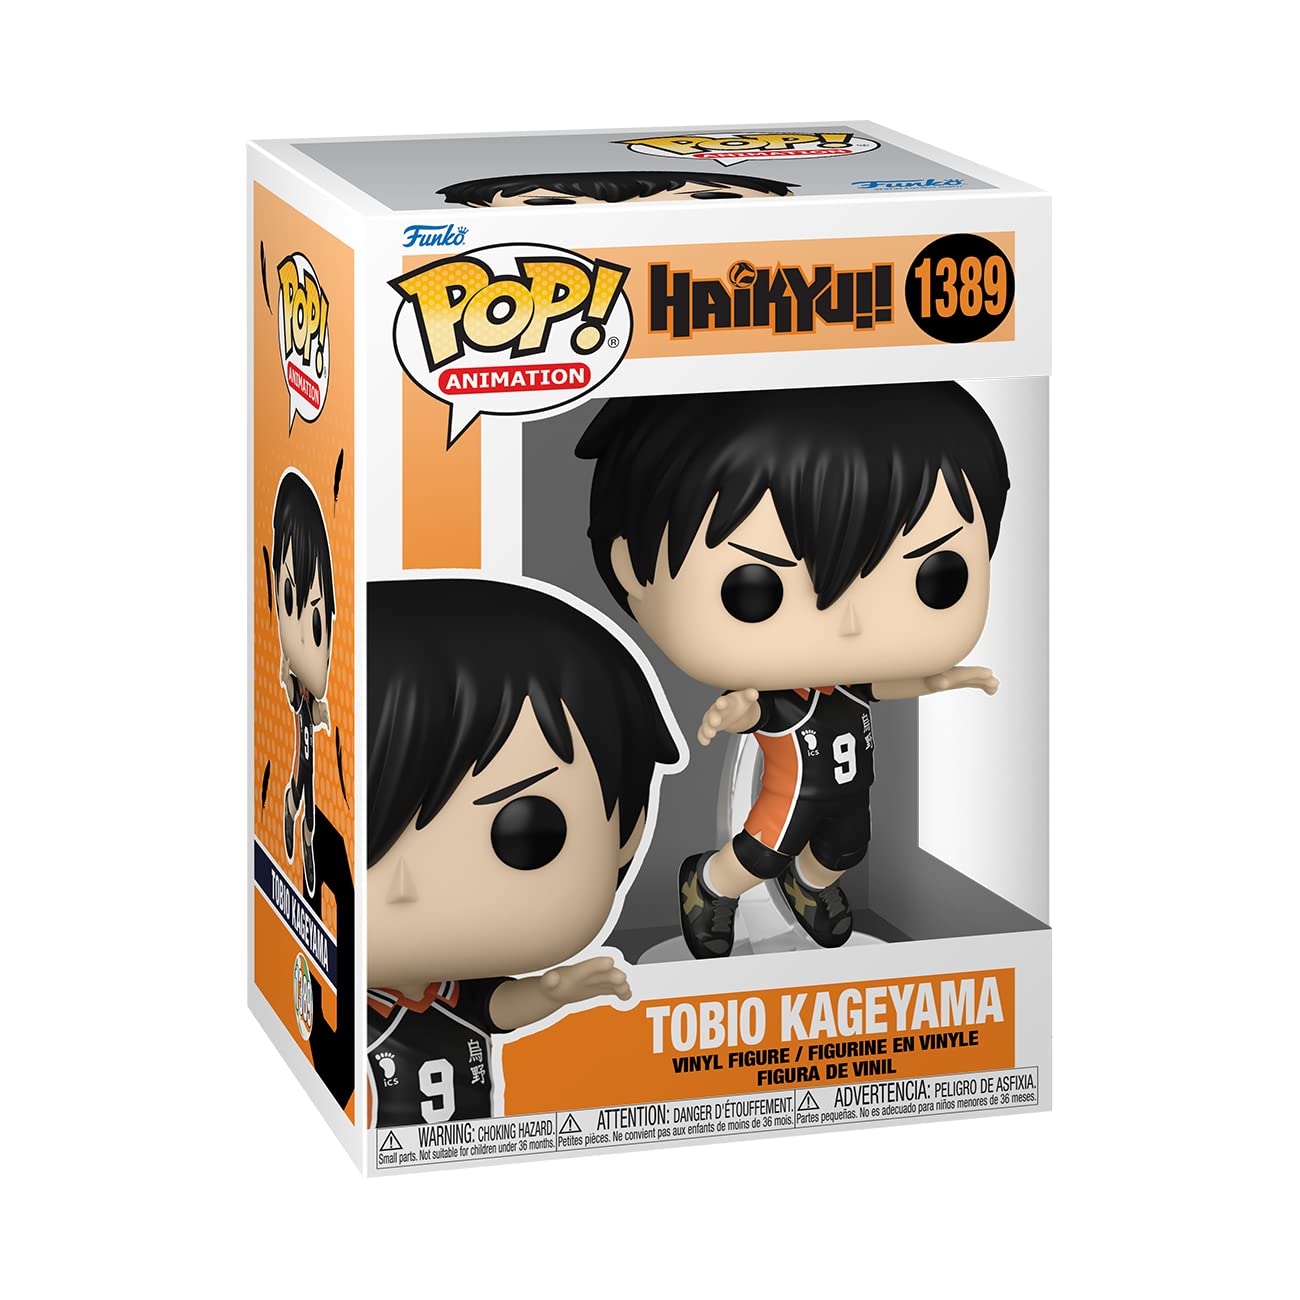 Funko POP! Animation: Haikyu - Kageyama - Haikyu! - Collectable Vinyl Figure - Gift Idea - Official Merchandise - Toys for Kids & Adults - Anime Fans - Model Figure for Collectors and Display